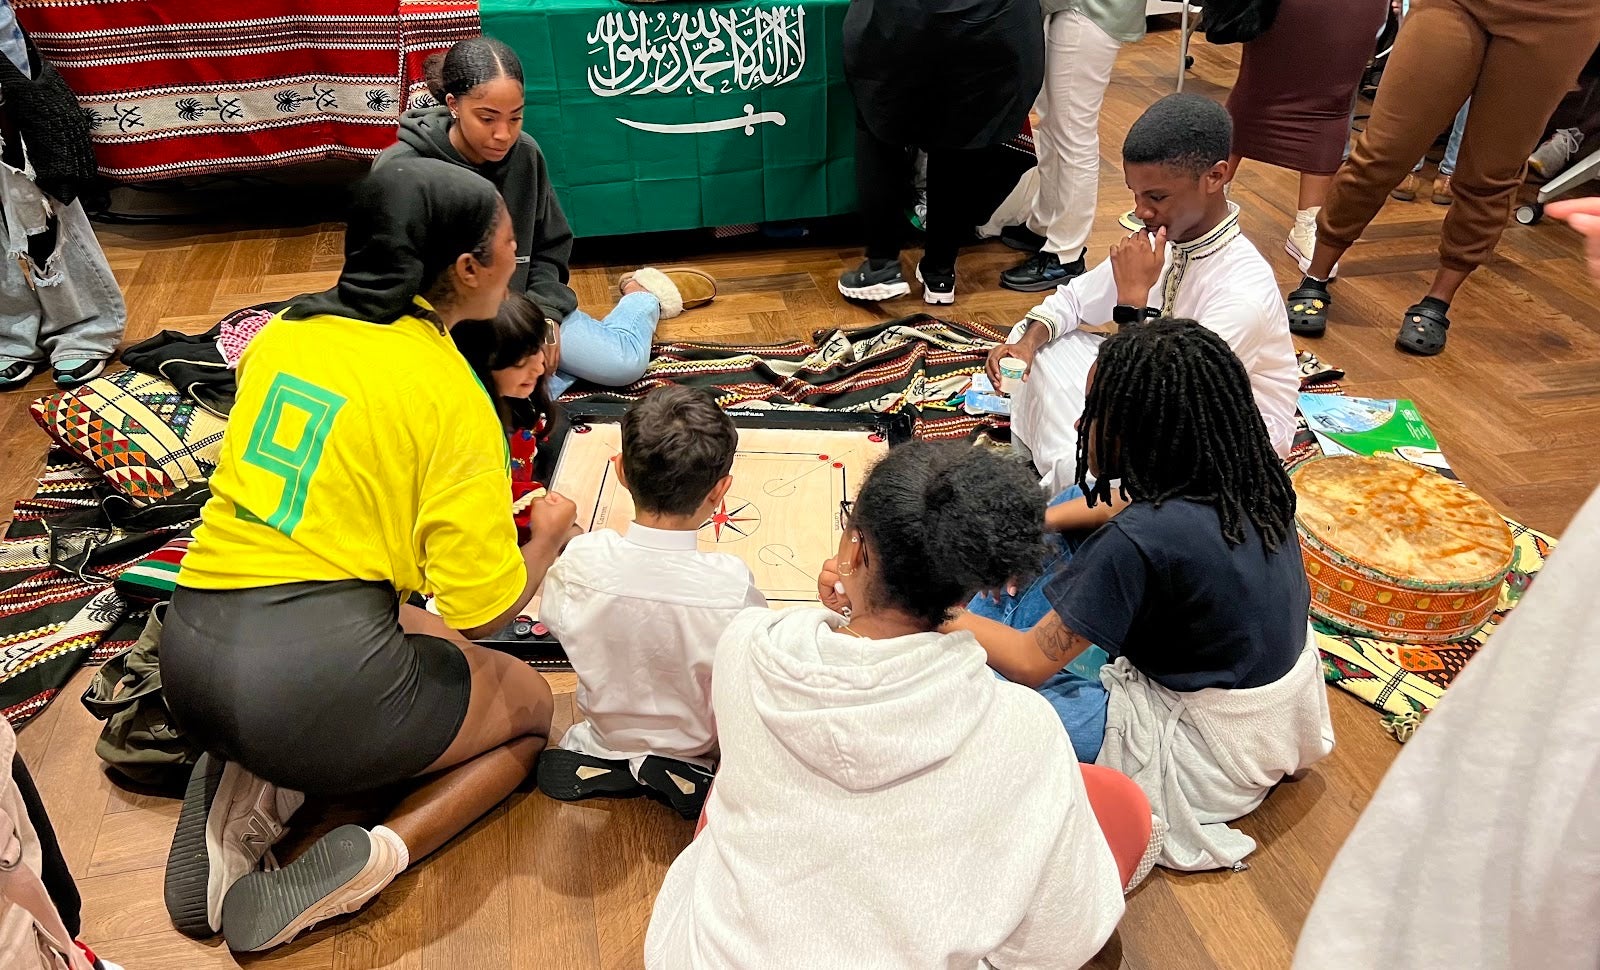 Students play a Saudi Board Game at the festival.